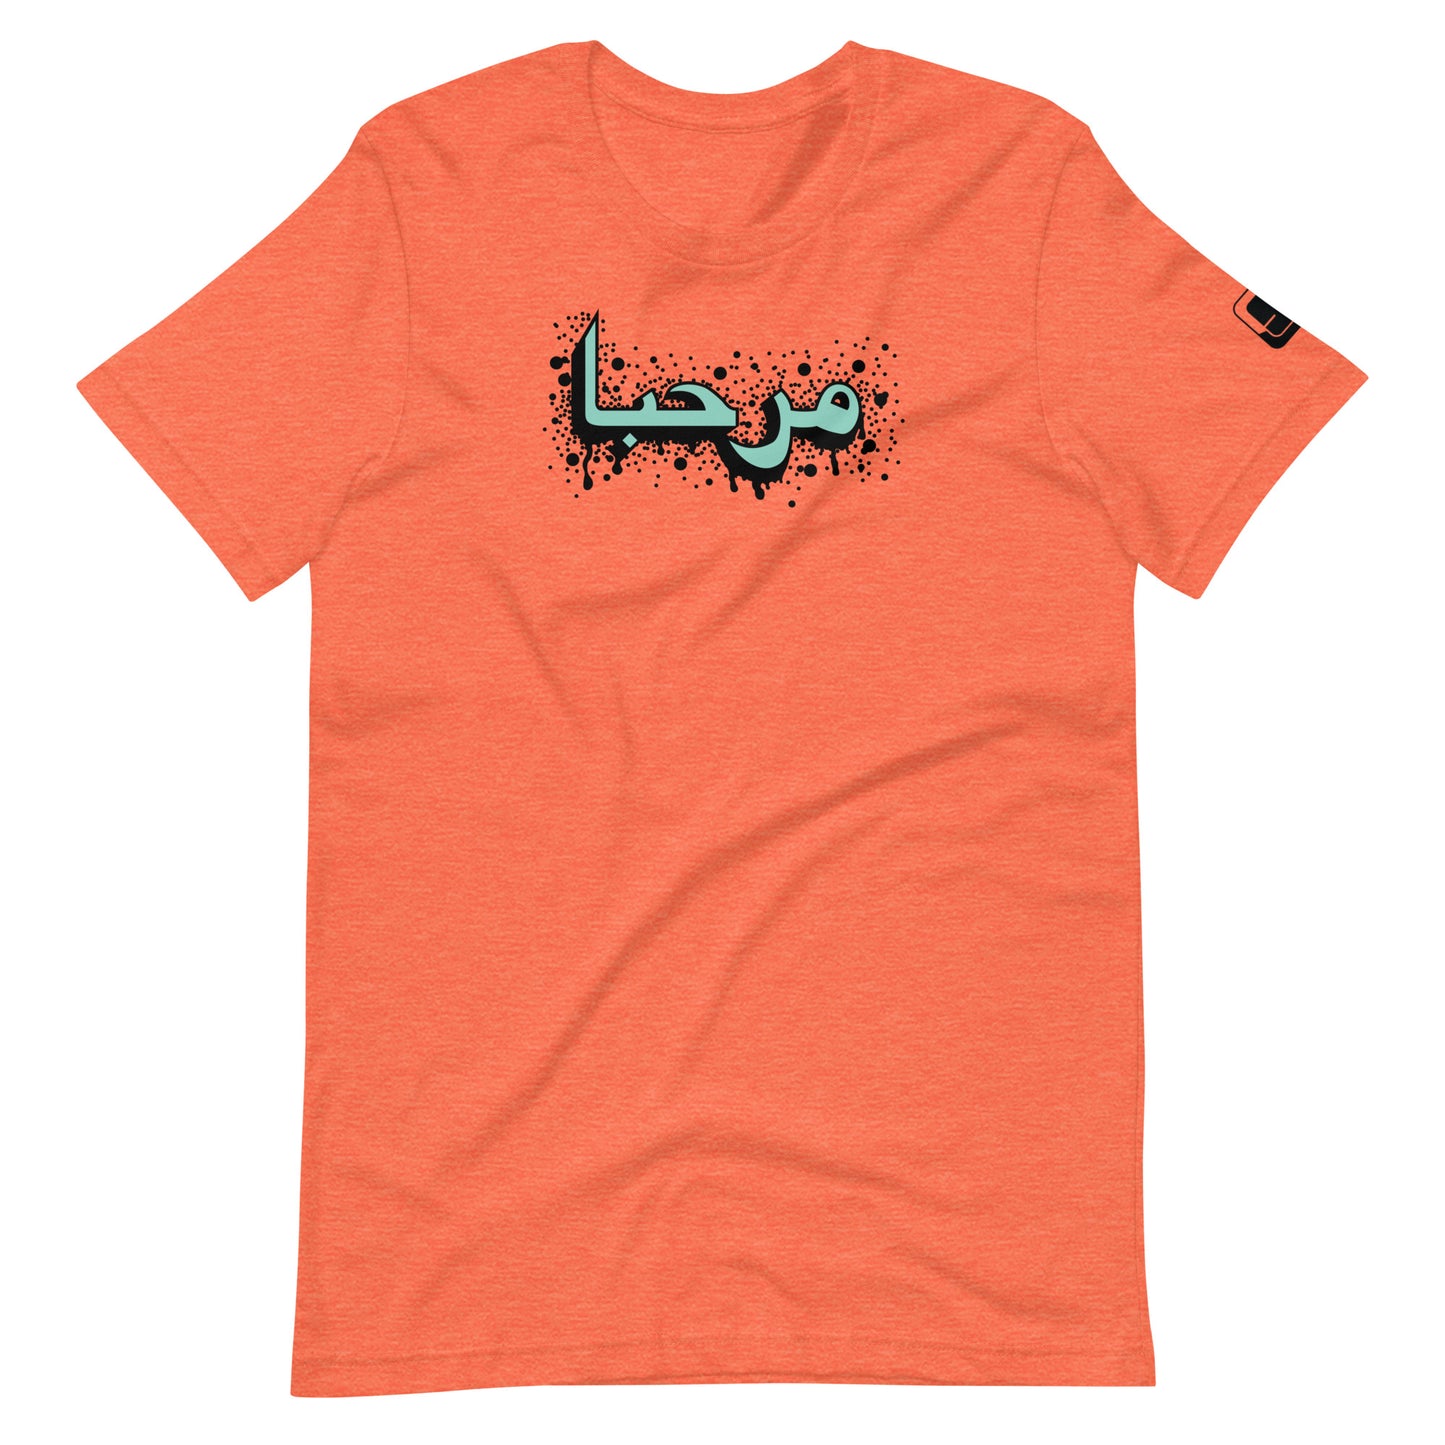 Heather orange t-shirt featuring central turquoise Arabic calligraphy with black shadow and scattered ink dots, accompanied by a small black logo patch on the sleeve, displayed against a white background.